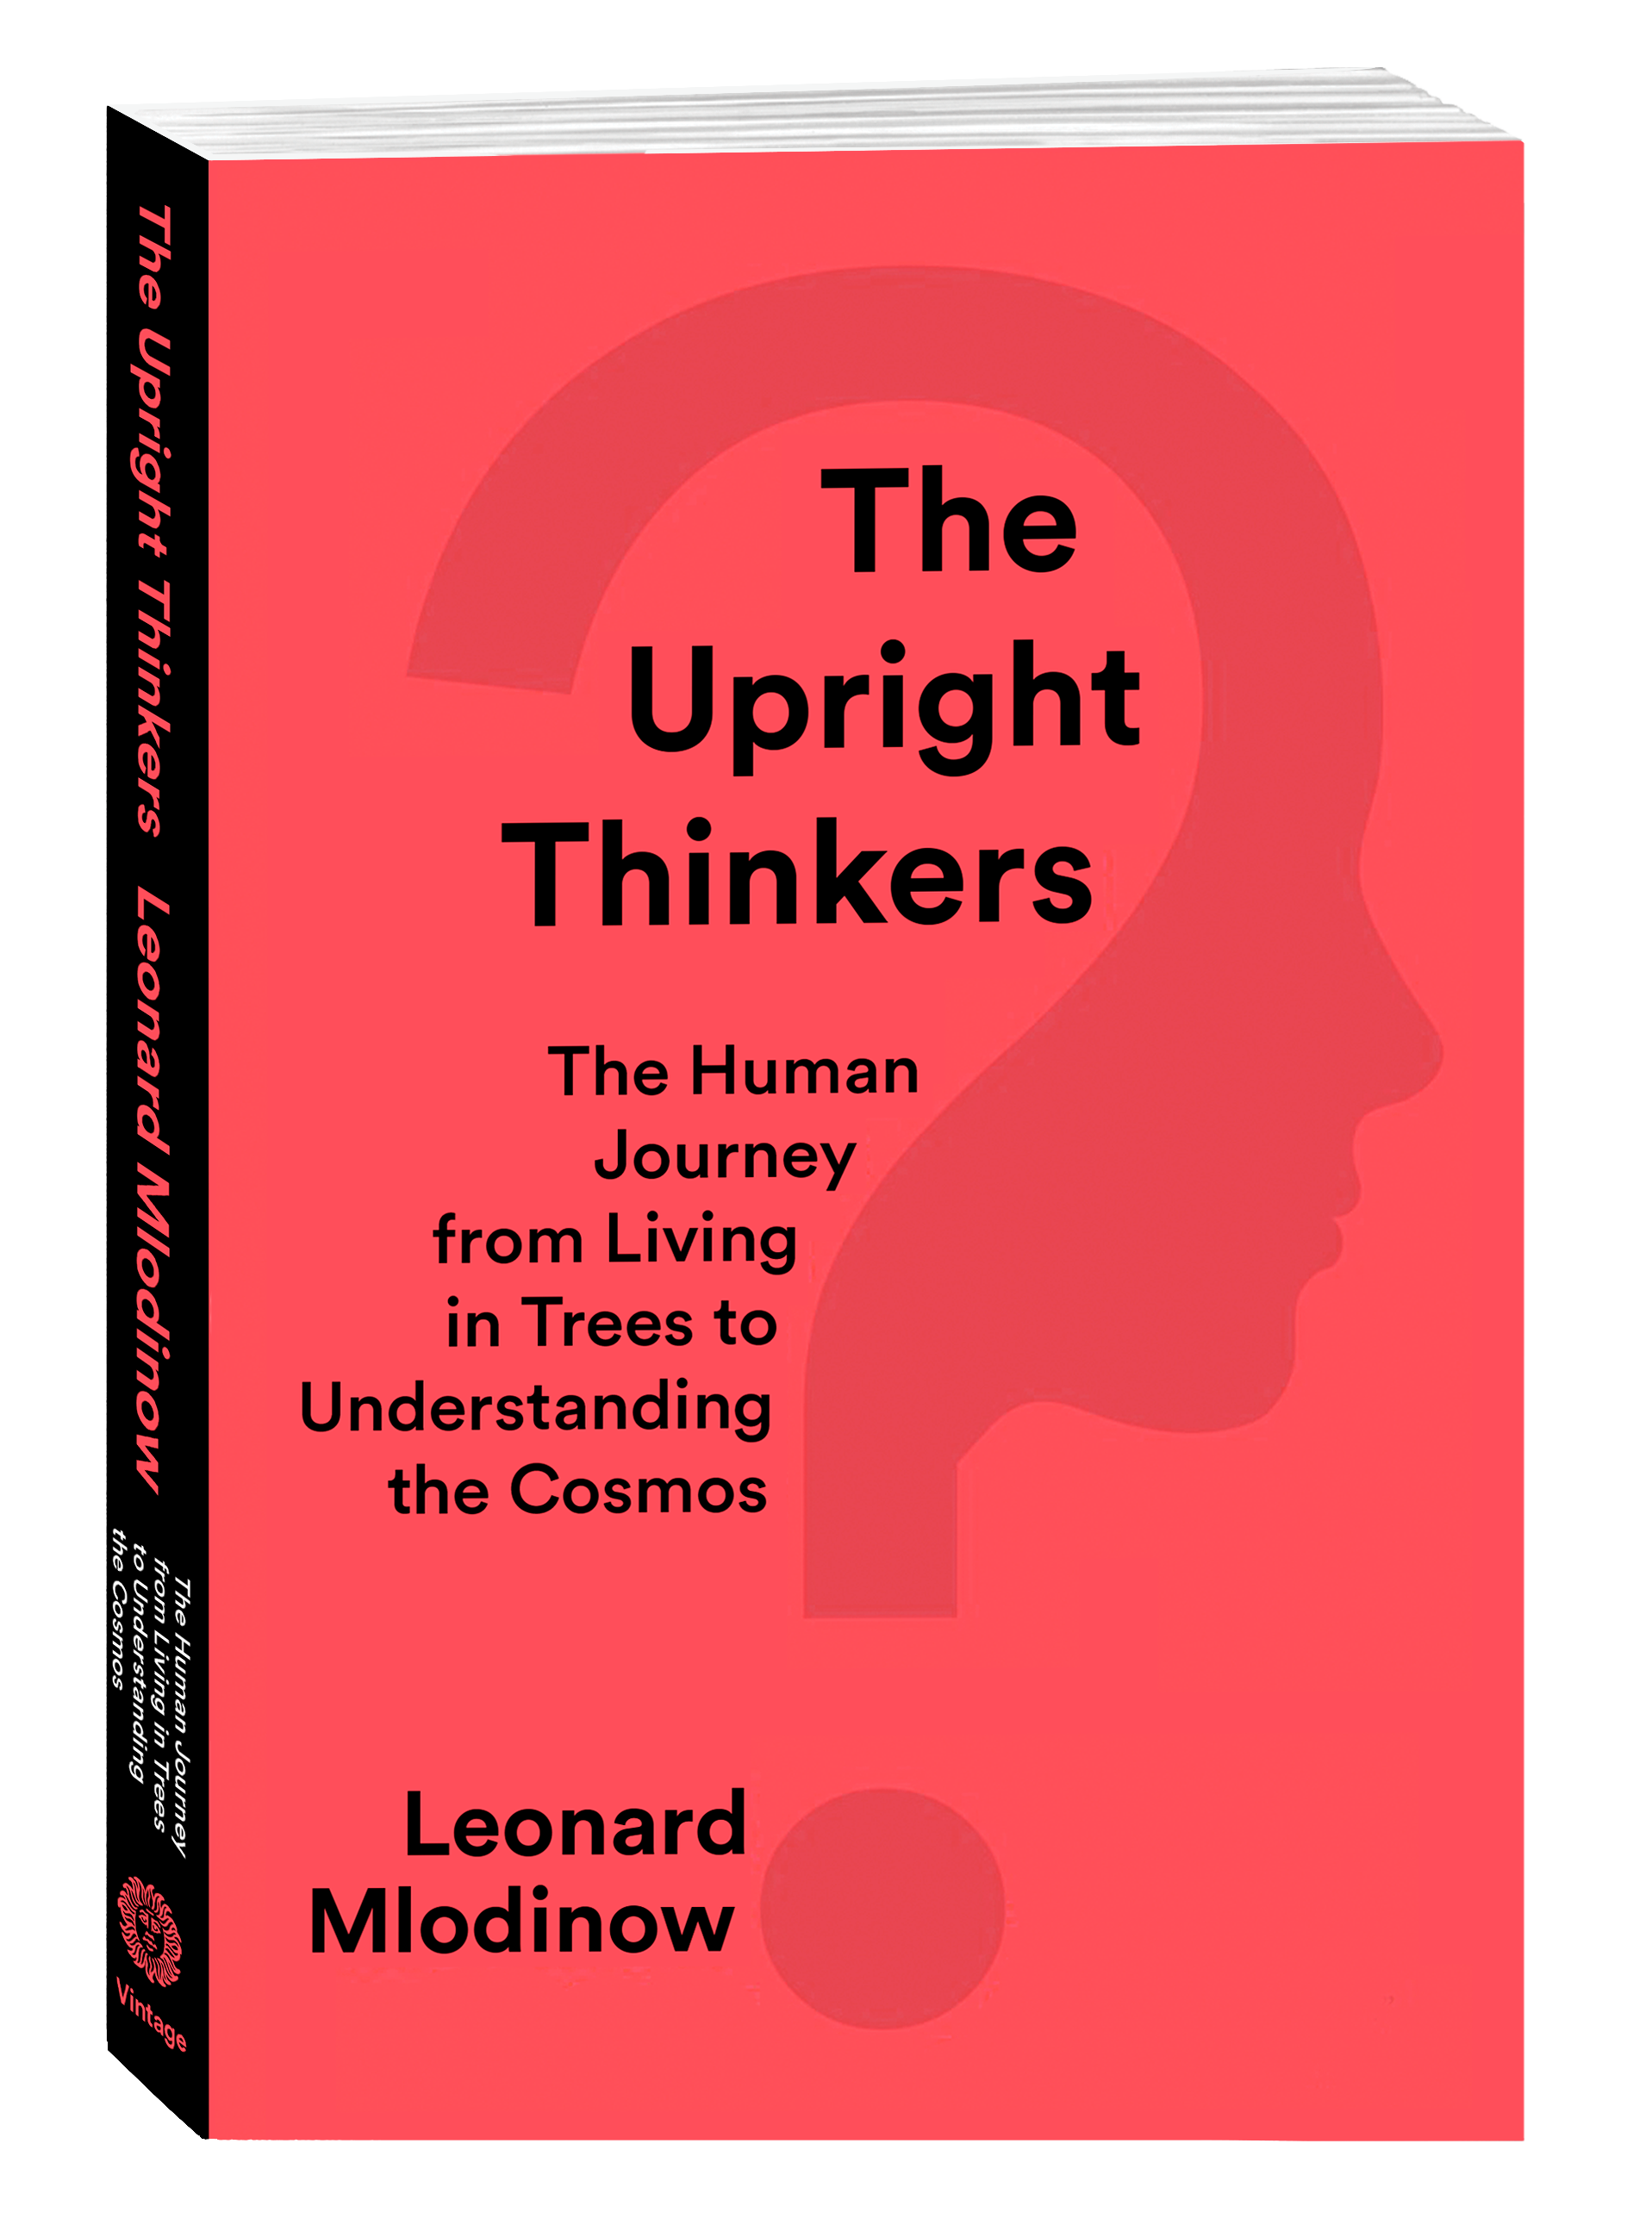 Upright Thinkers